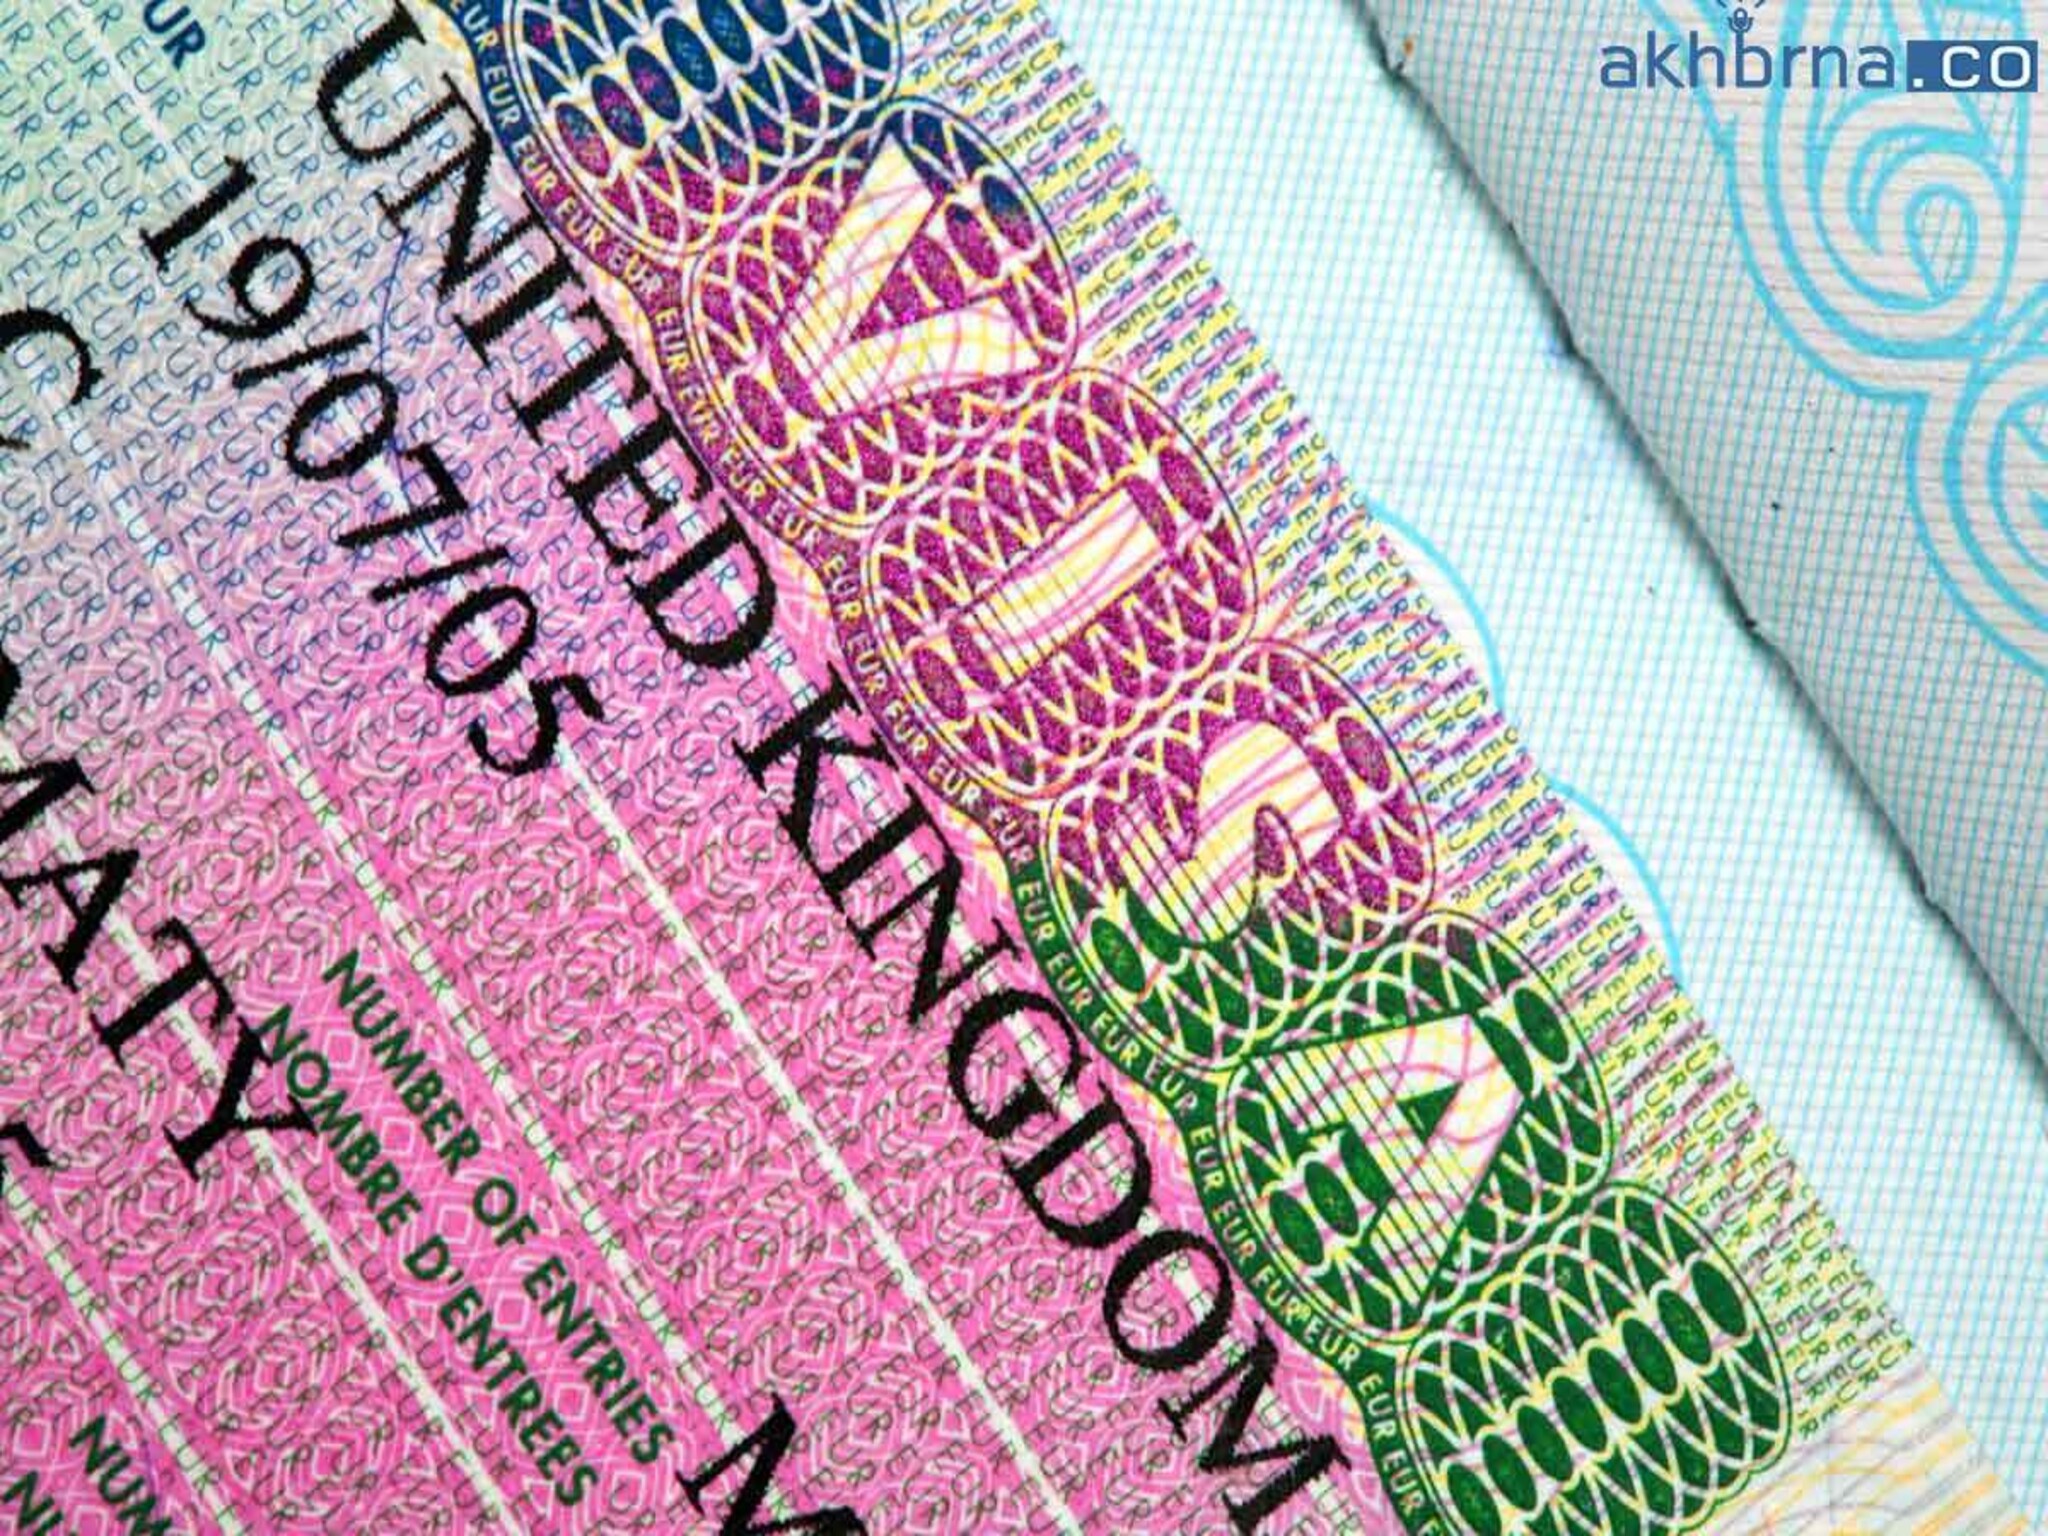 UK announces a 55% increase in the minimum income for family visa sponsors